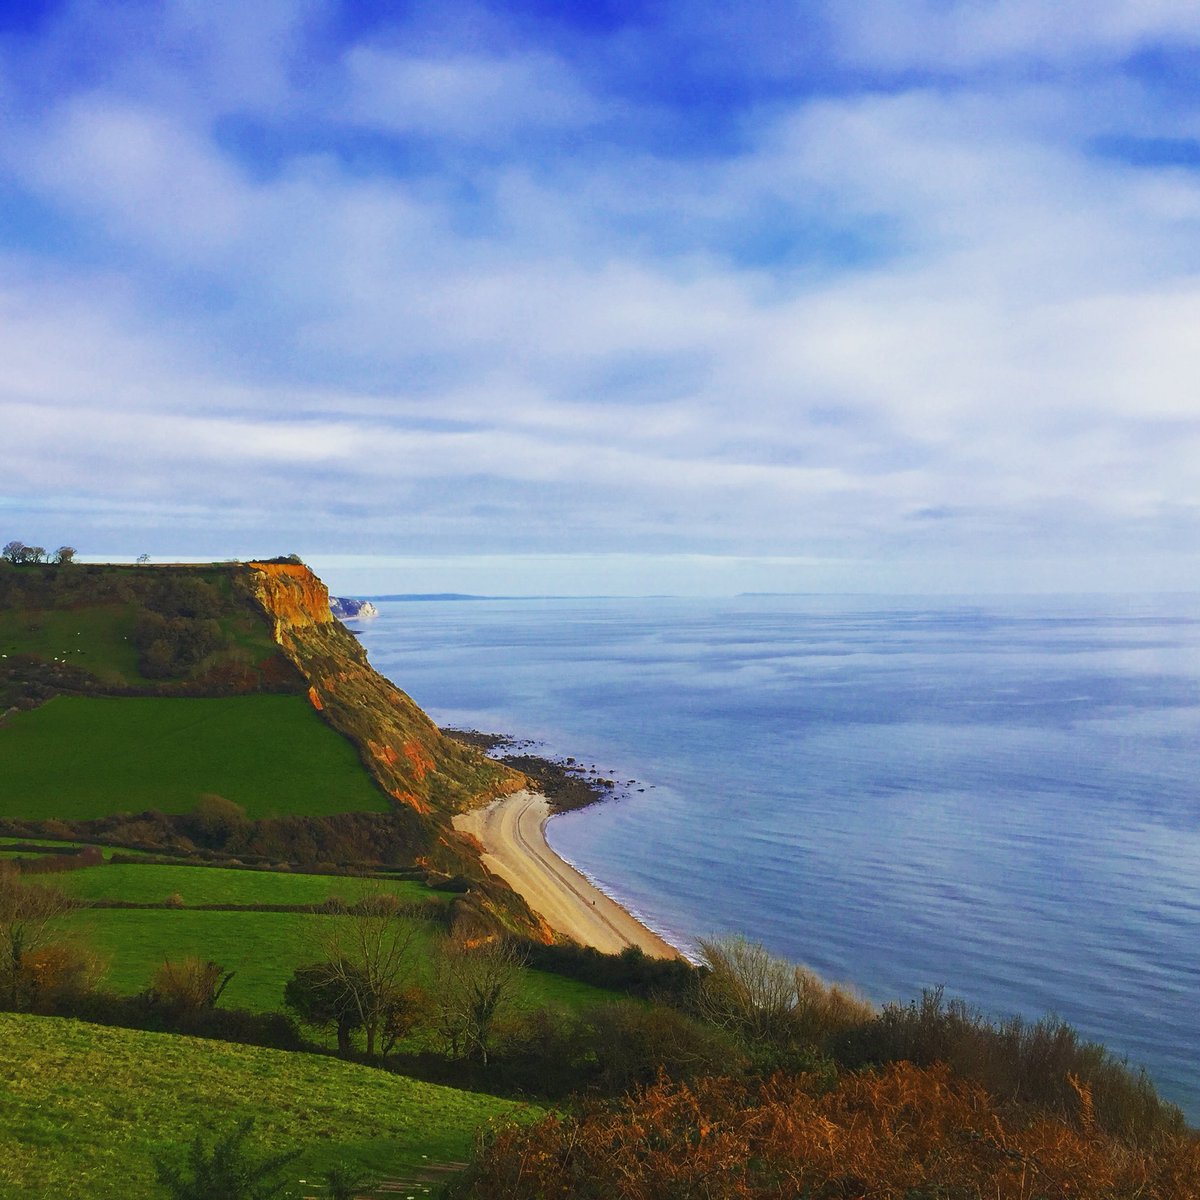 Took on some of those #Devon hills today with @Alscoutts so we could take in this view 🙌 #sidmouth #seaside